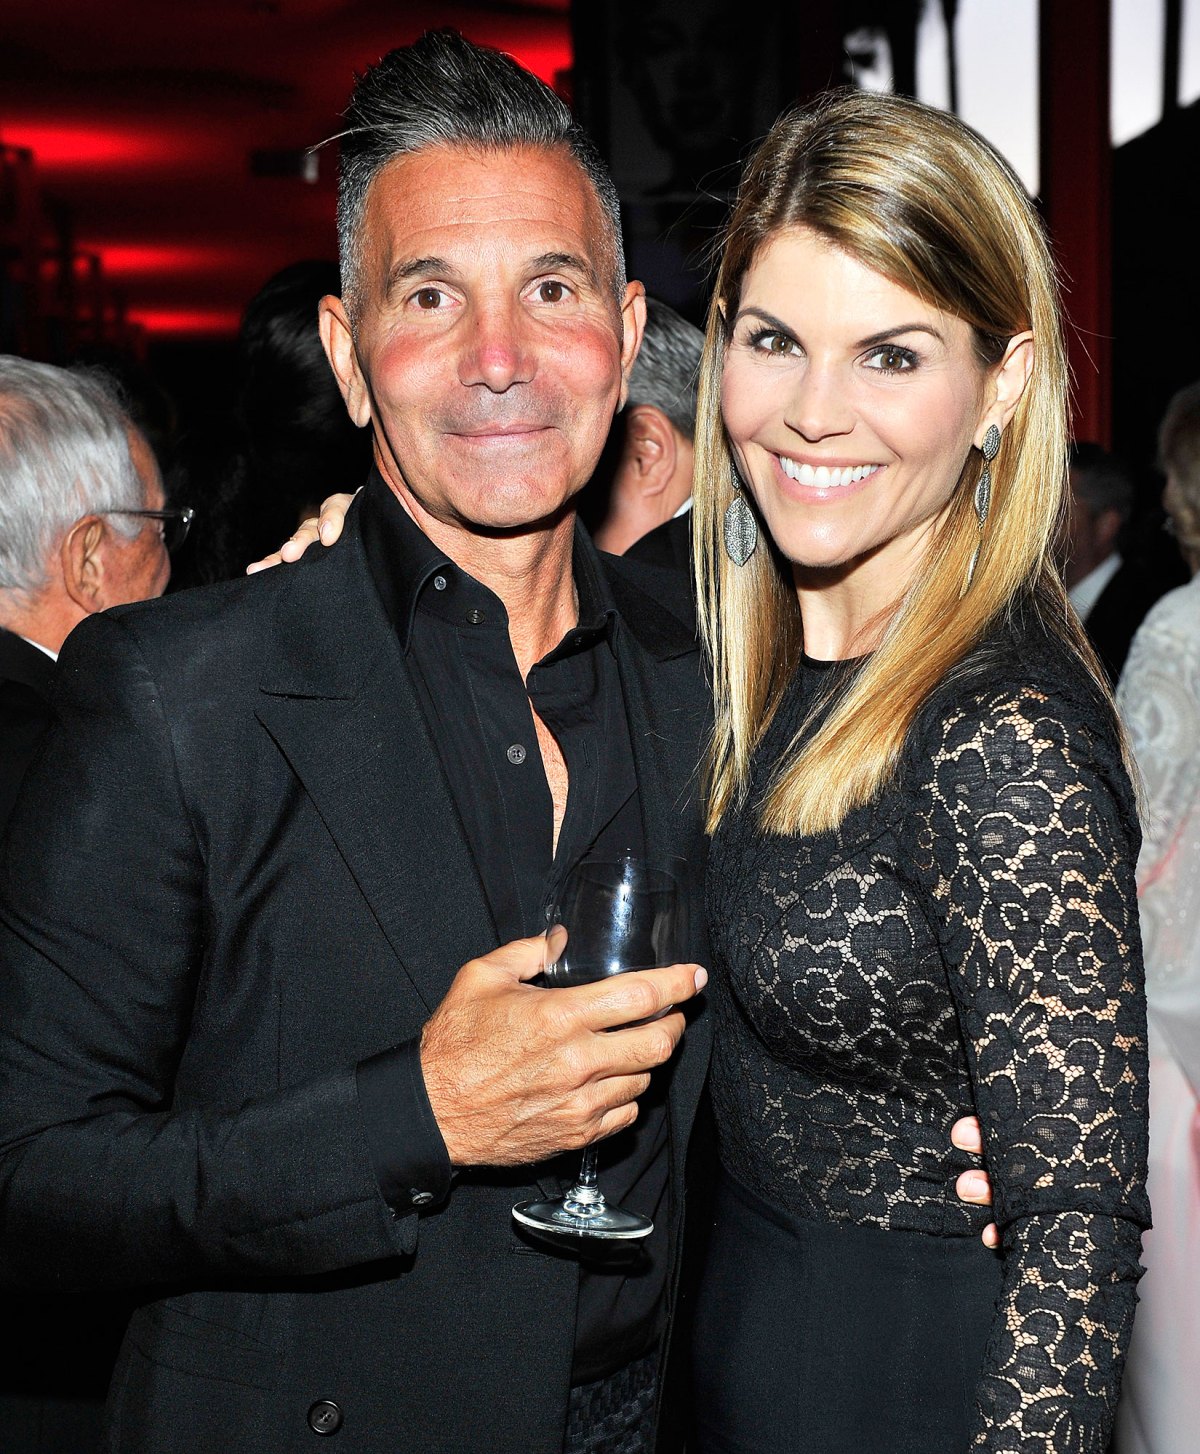 Full House Celebrities Fake Porn - Lori Loughlin and Mossimo Giannulli's Relationship Timeline